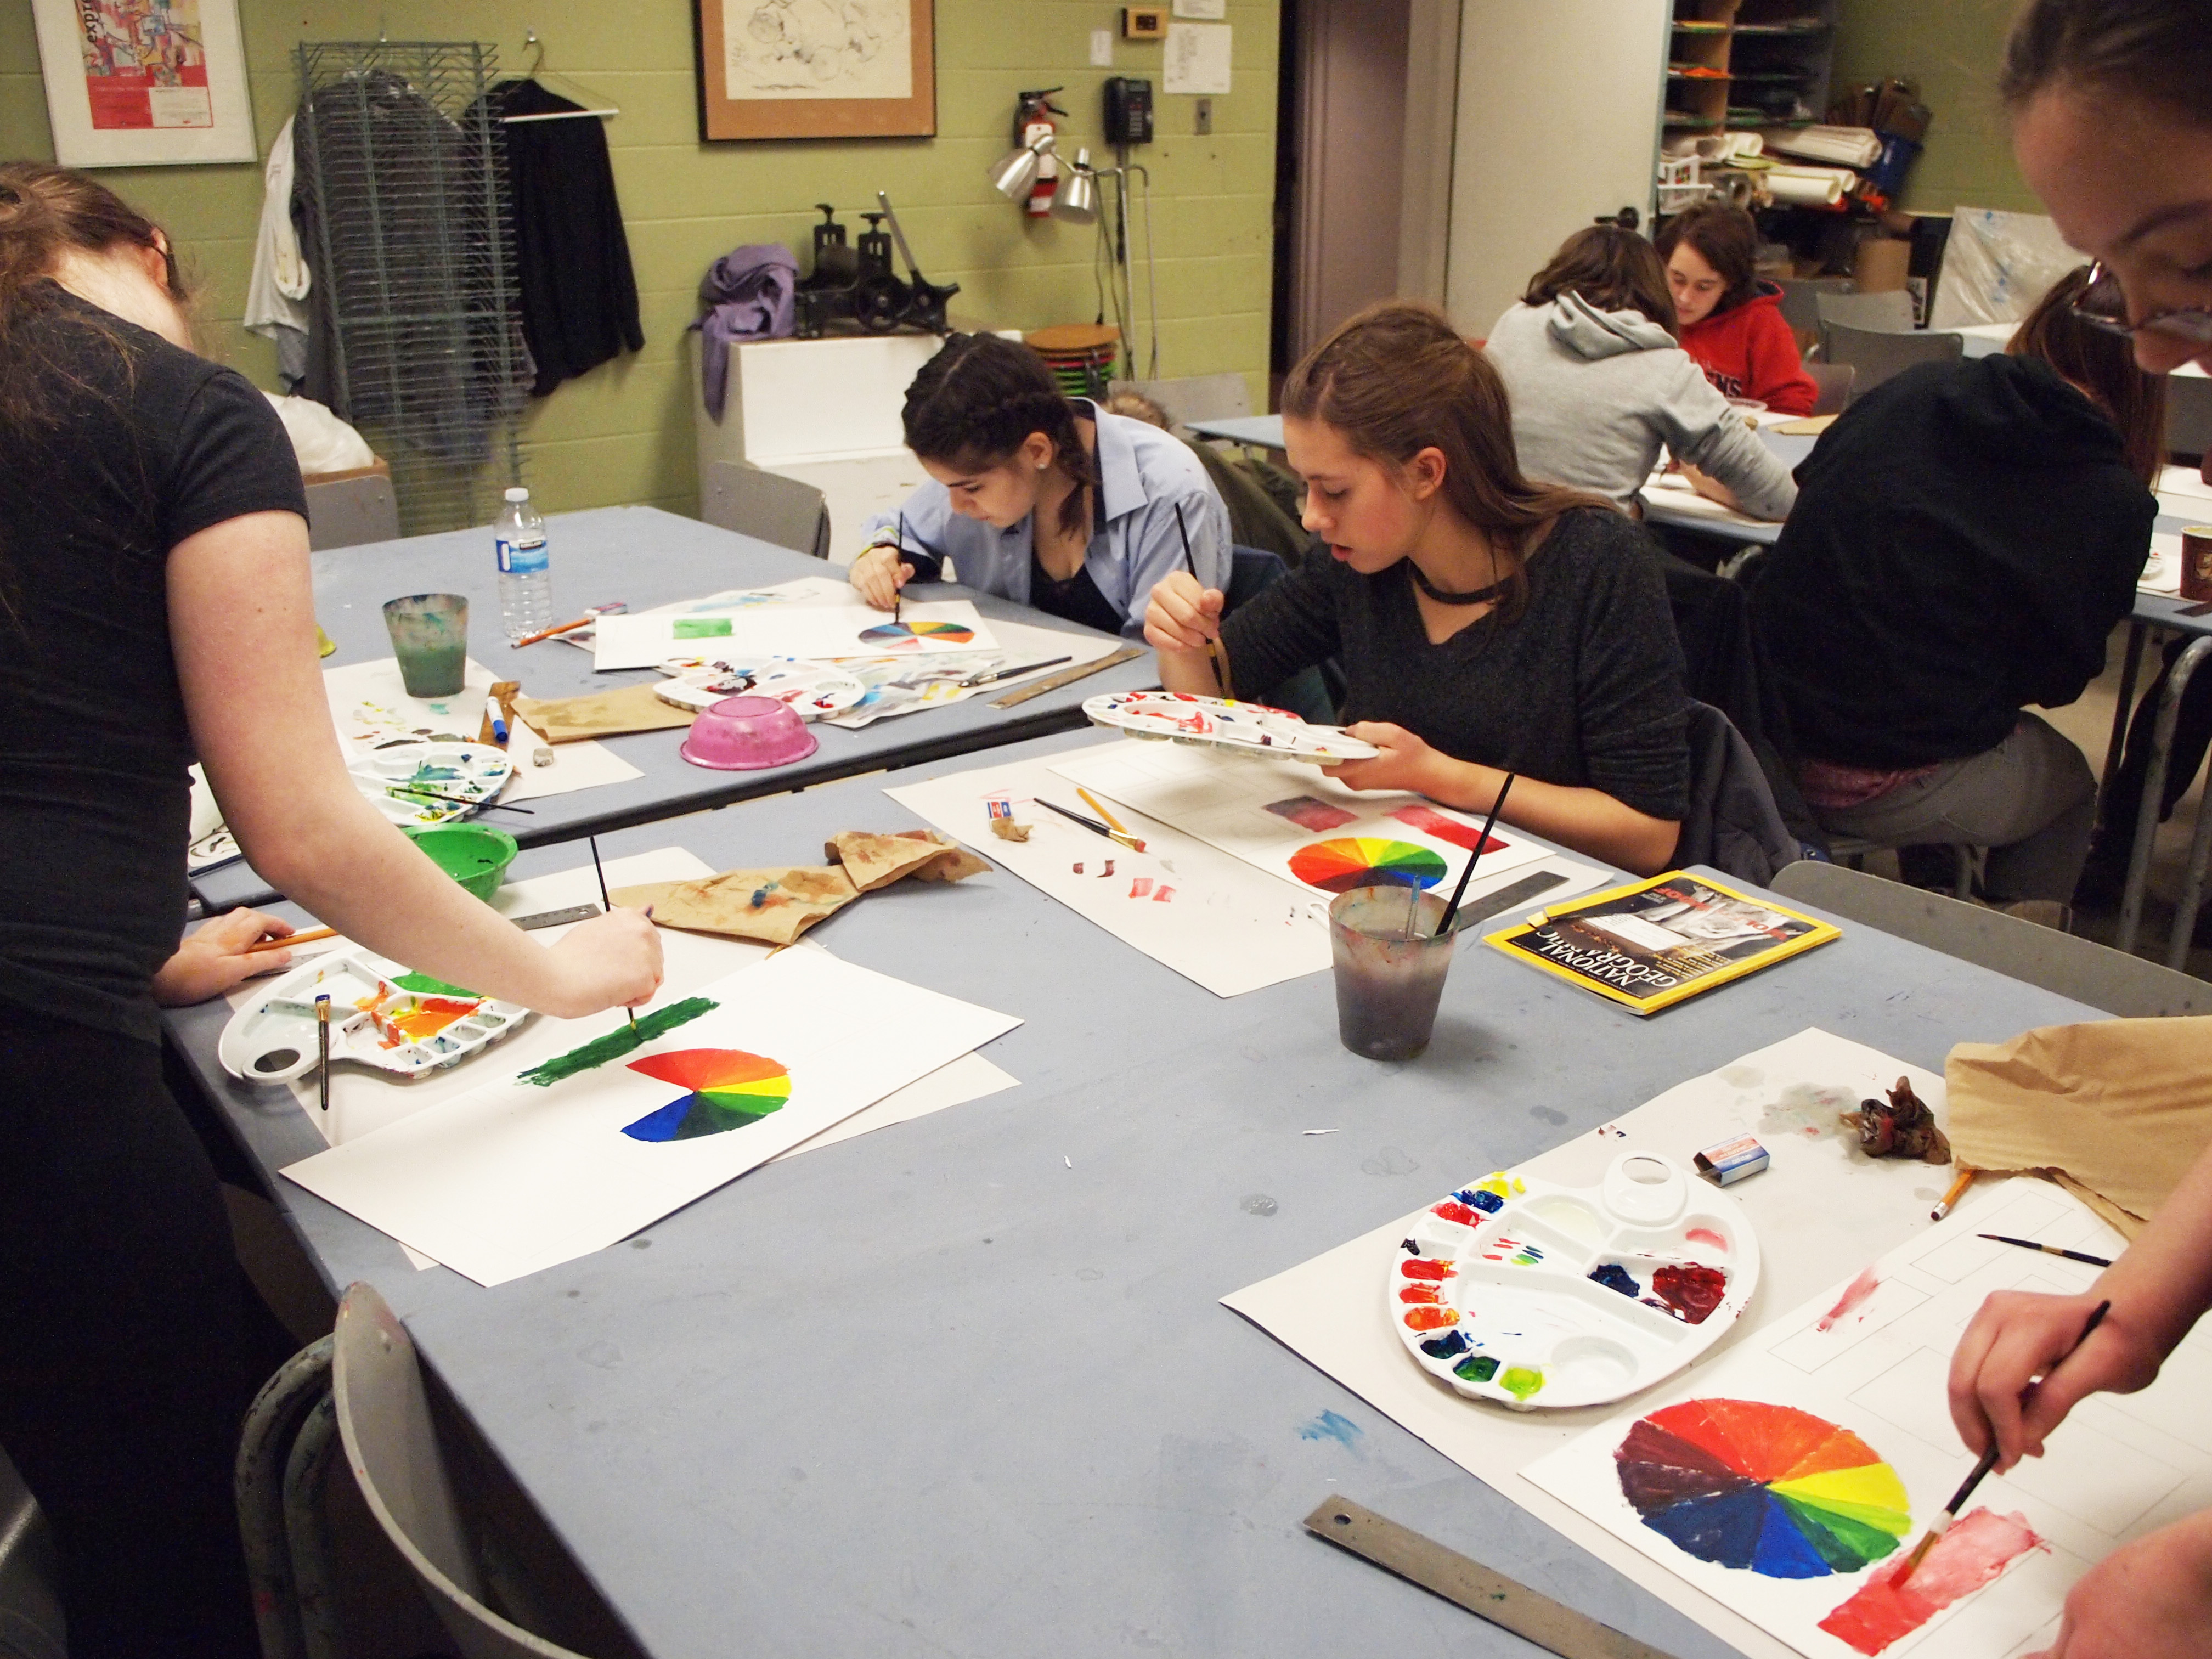 Youth Council members seated at studio tables practicing colour-mixing in acrylic paint